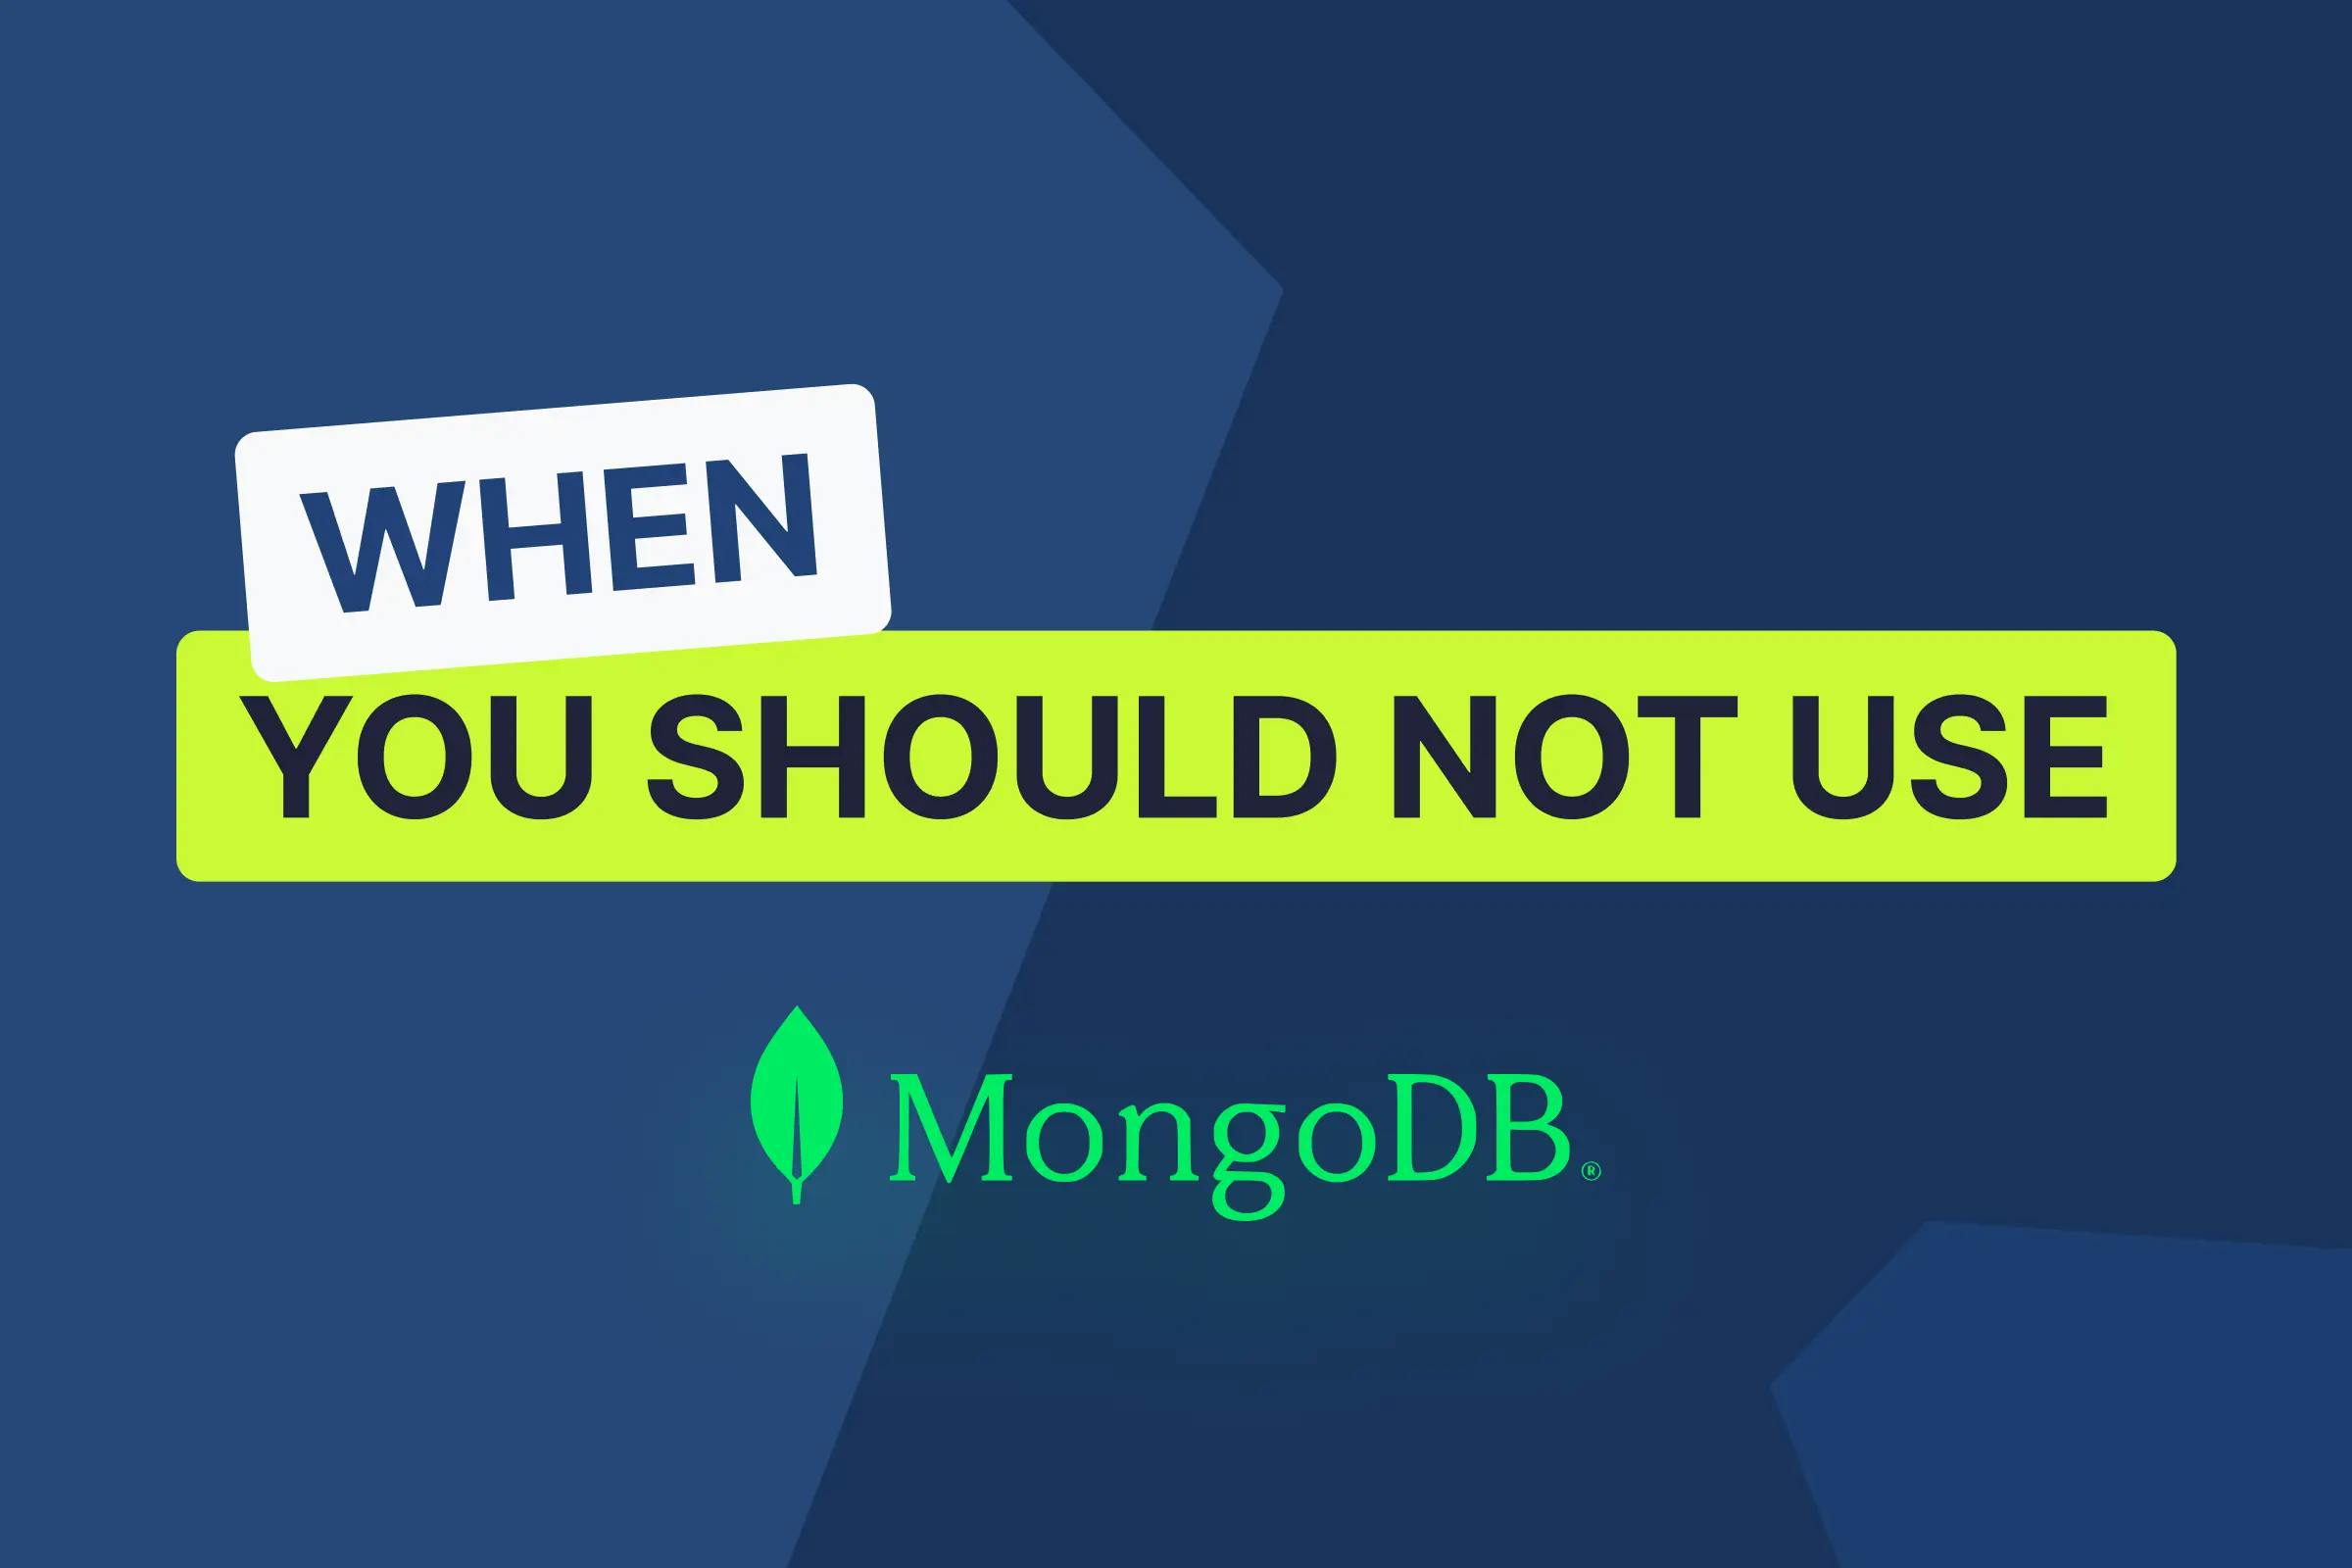 When you should NOT use MongoDB?